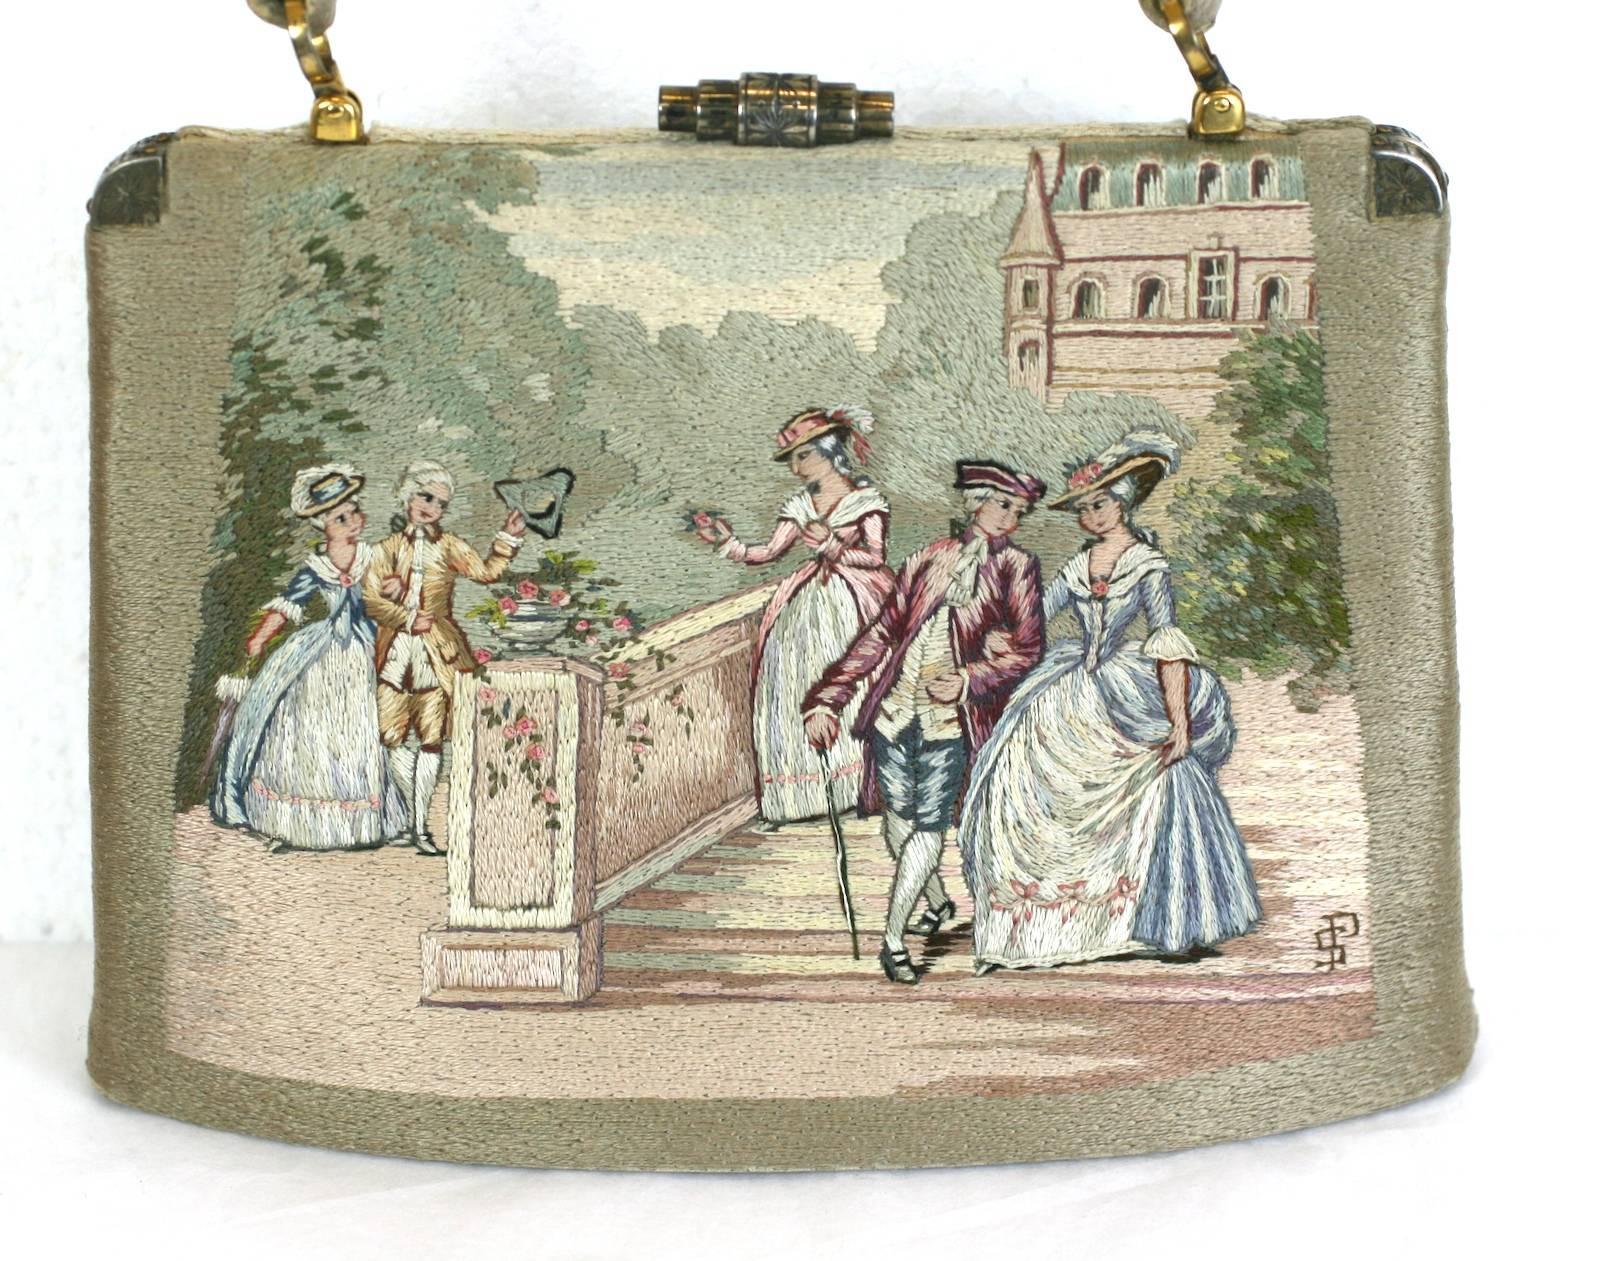 Lovely embroidered french purse with 18th Century scenes. Lavishly silk stitch embroidered and beautifully detailed. Clasp and hilt are gilded sterling with elaborate etch work. Even the handles, base and body of the bag are embroidered in silk